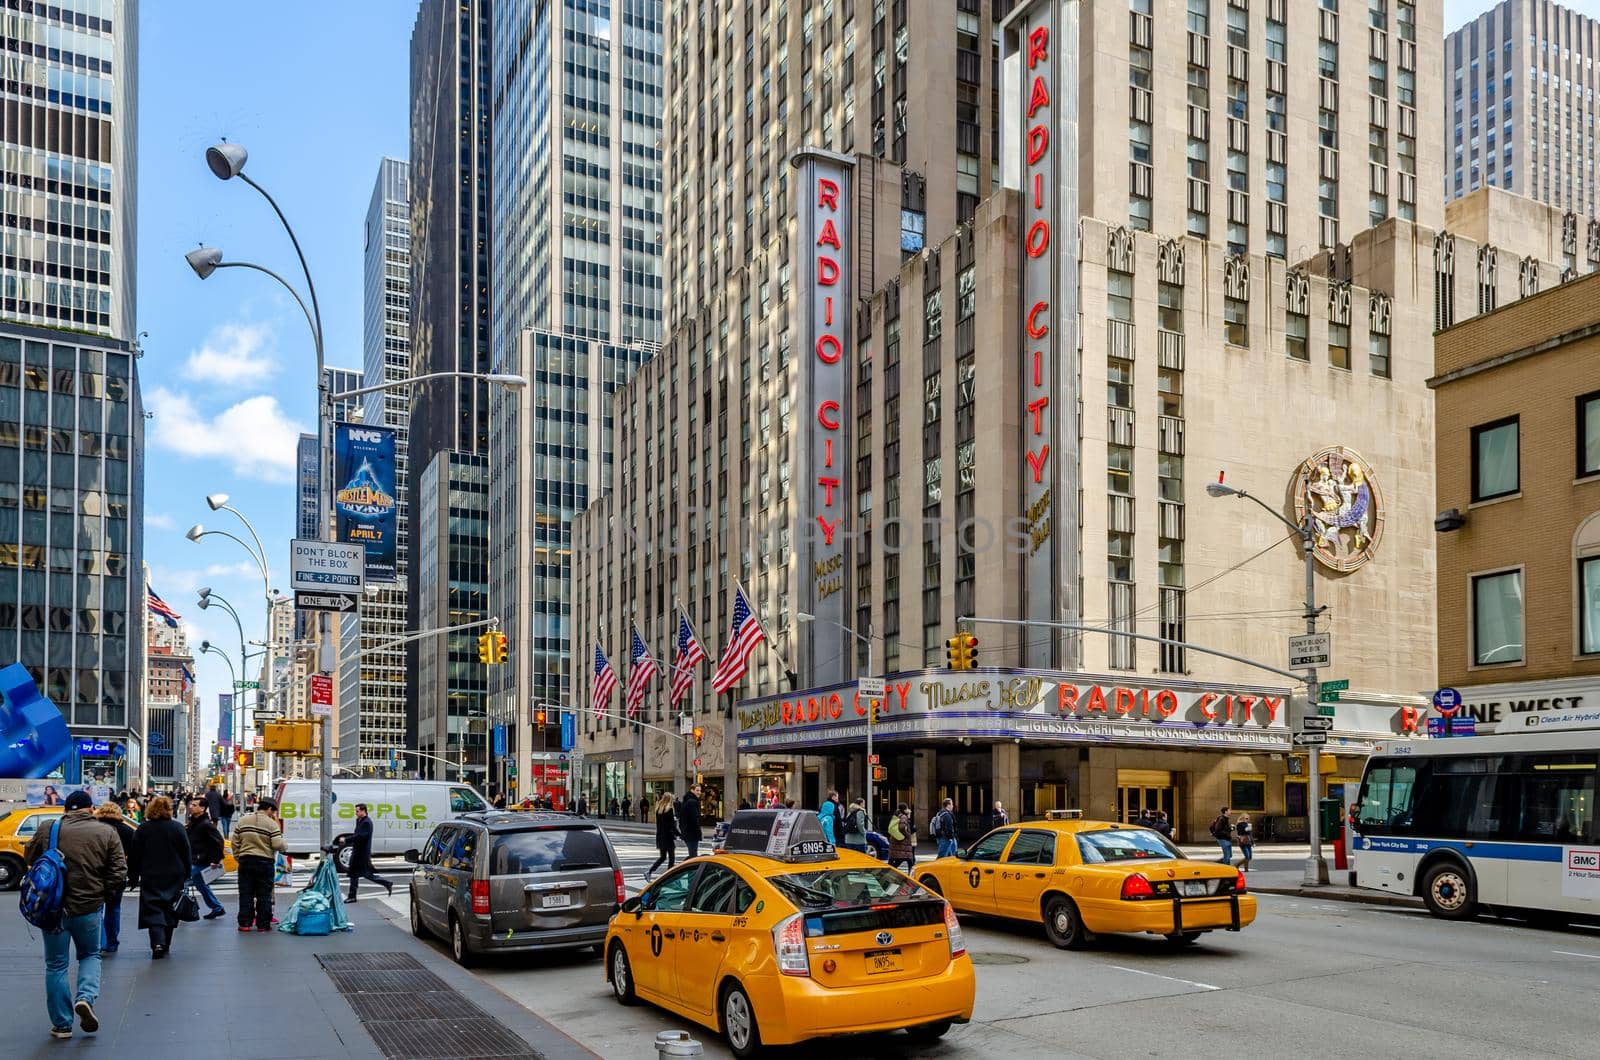 Radio City Music Hall, New York City with yellow Taxi Cabs in the forefront by bildgigant